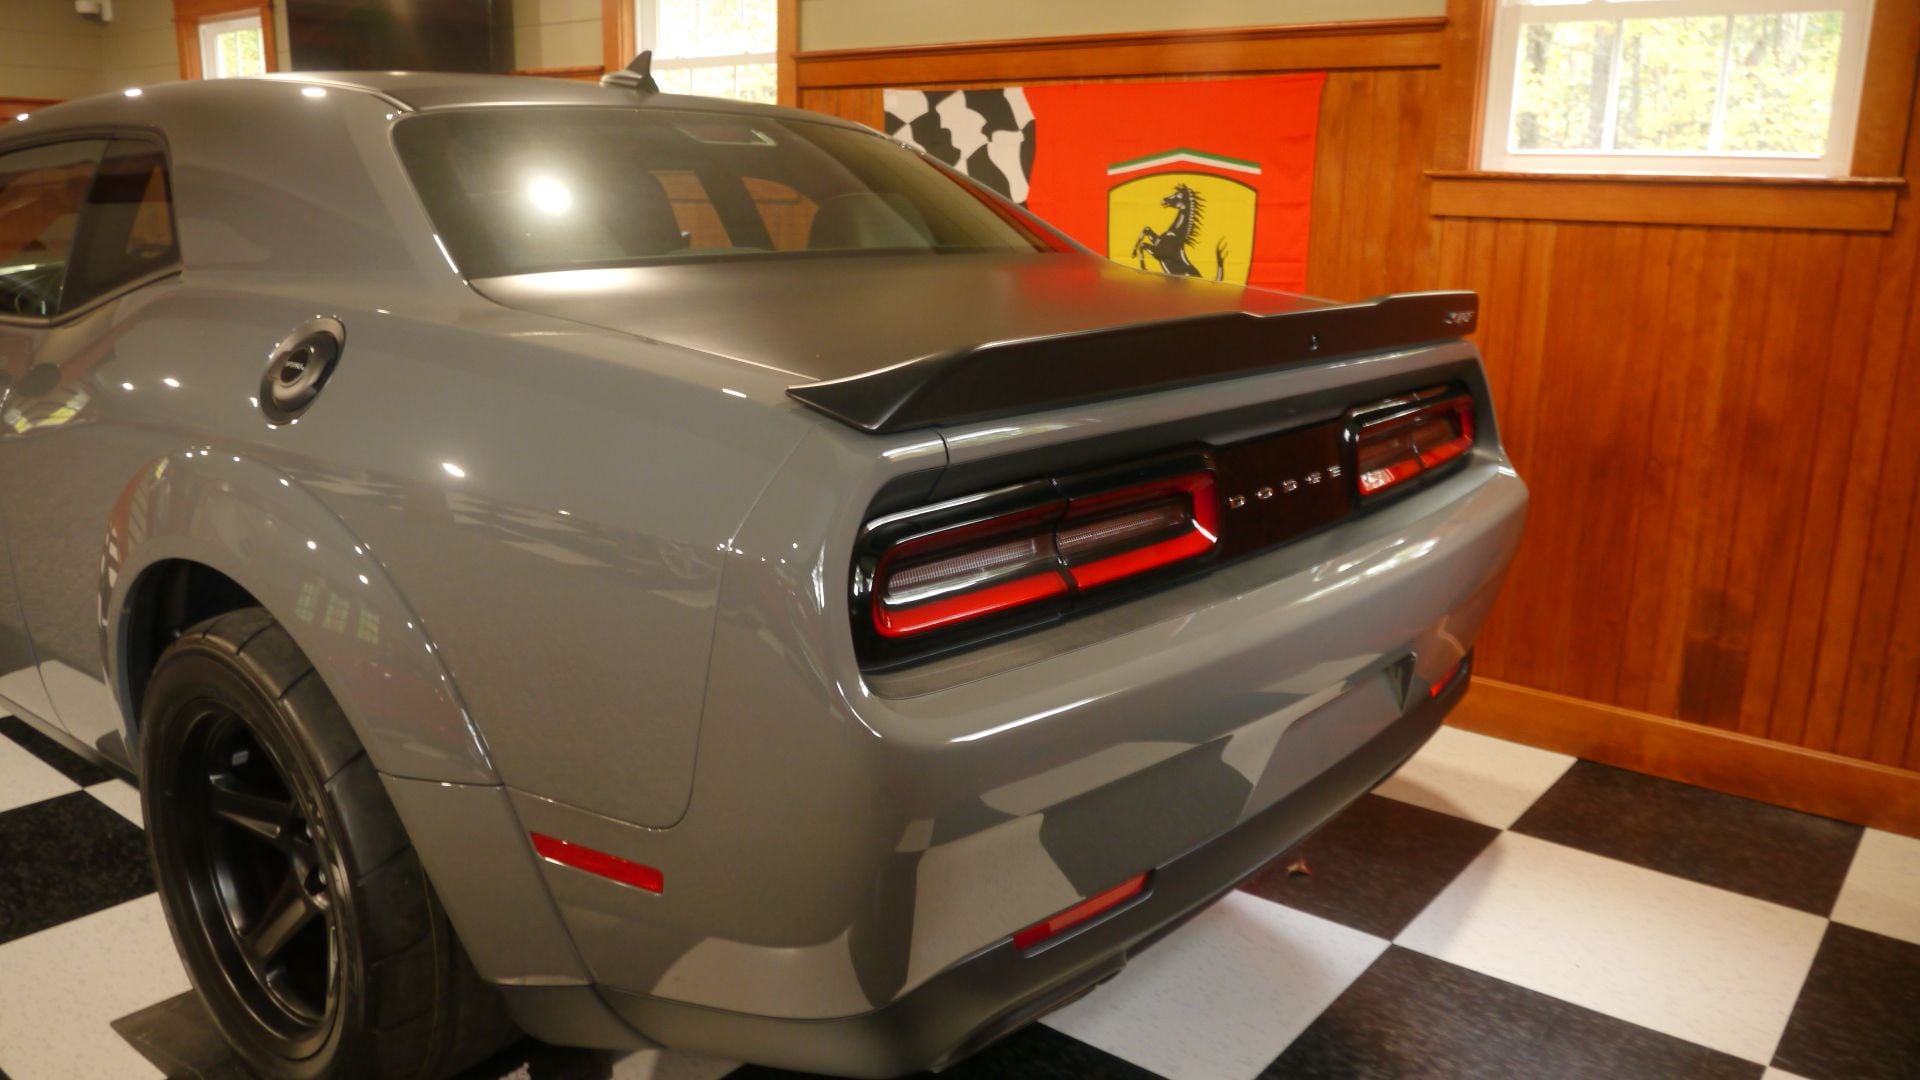 2018 Dodge Challenger - Dodge Demon for sale! - New - VIN 2C3CDZH97JH102003 - 18 Miles - 8 cyl - 2WD - Automatic - Coupe - Gray - Goffstown, NH 03045, United States